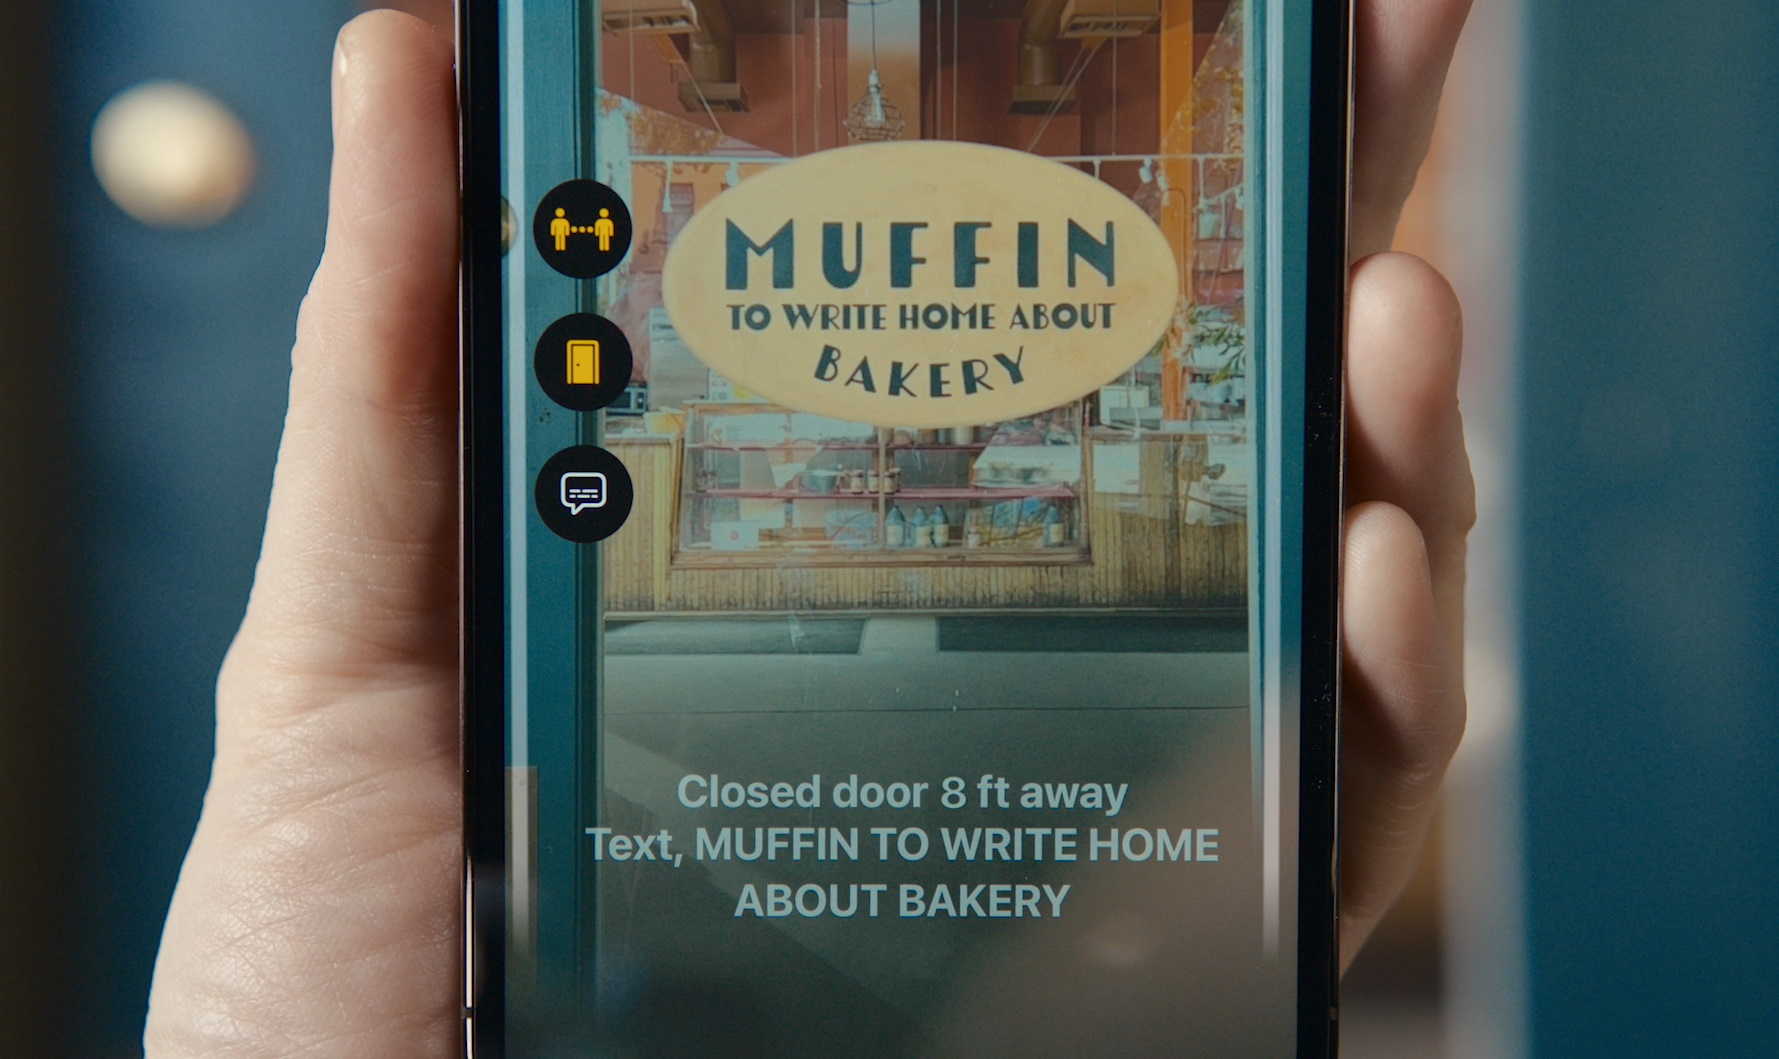 Image of a phone showing information about a door it sees: 